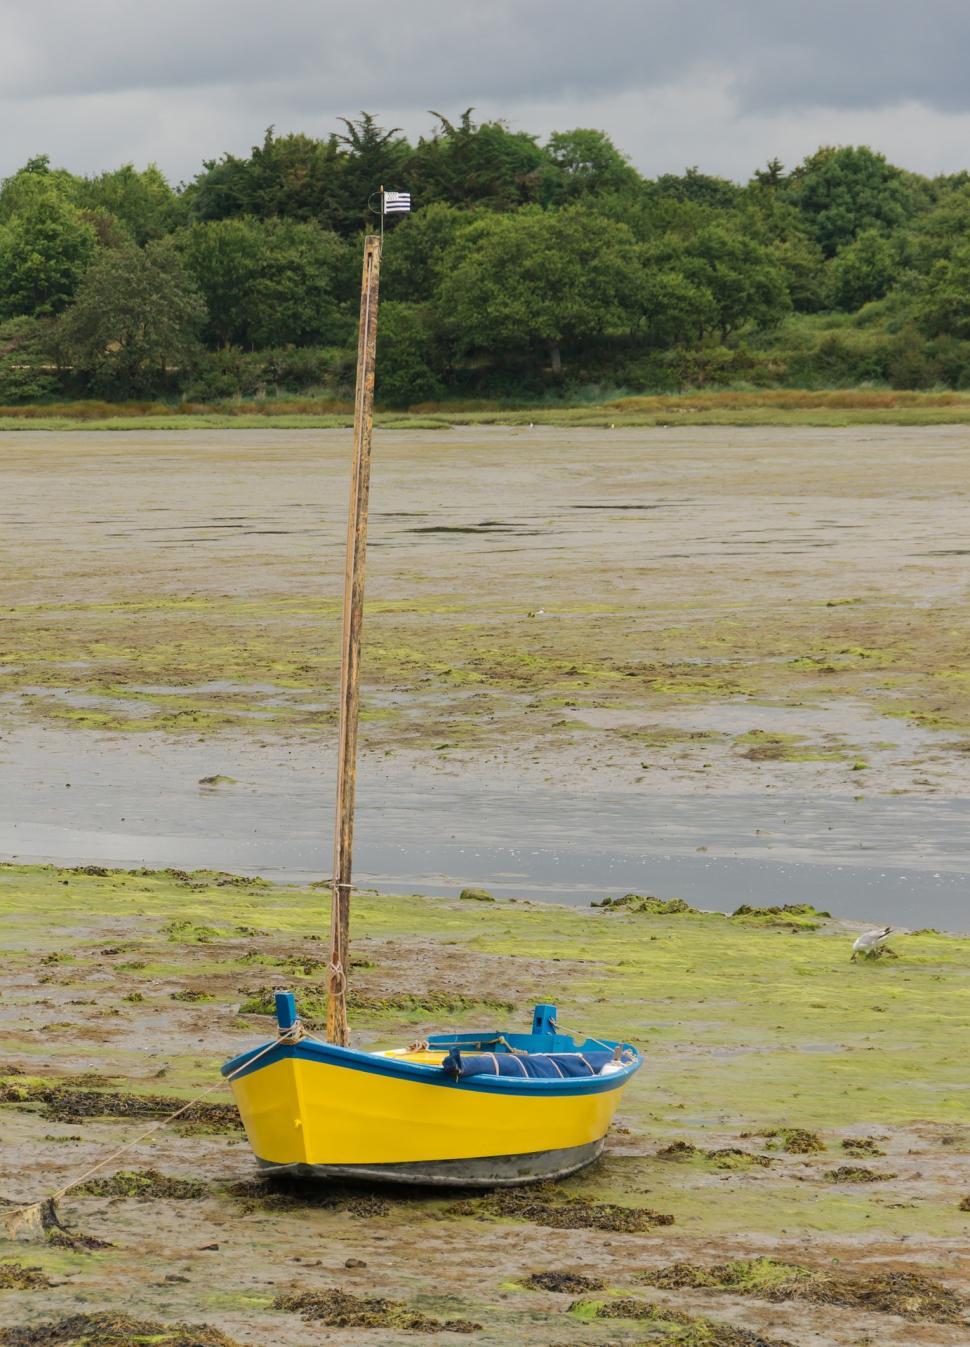 Free Image of Yellow and Blue Boat on Muddy Beach 